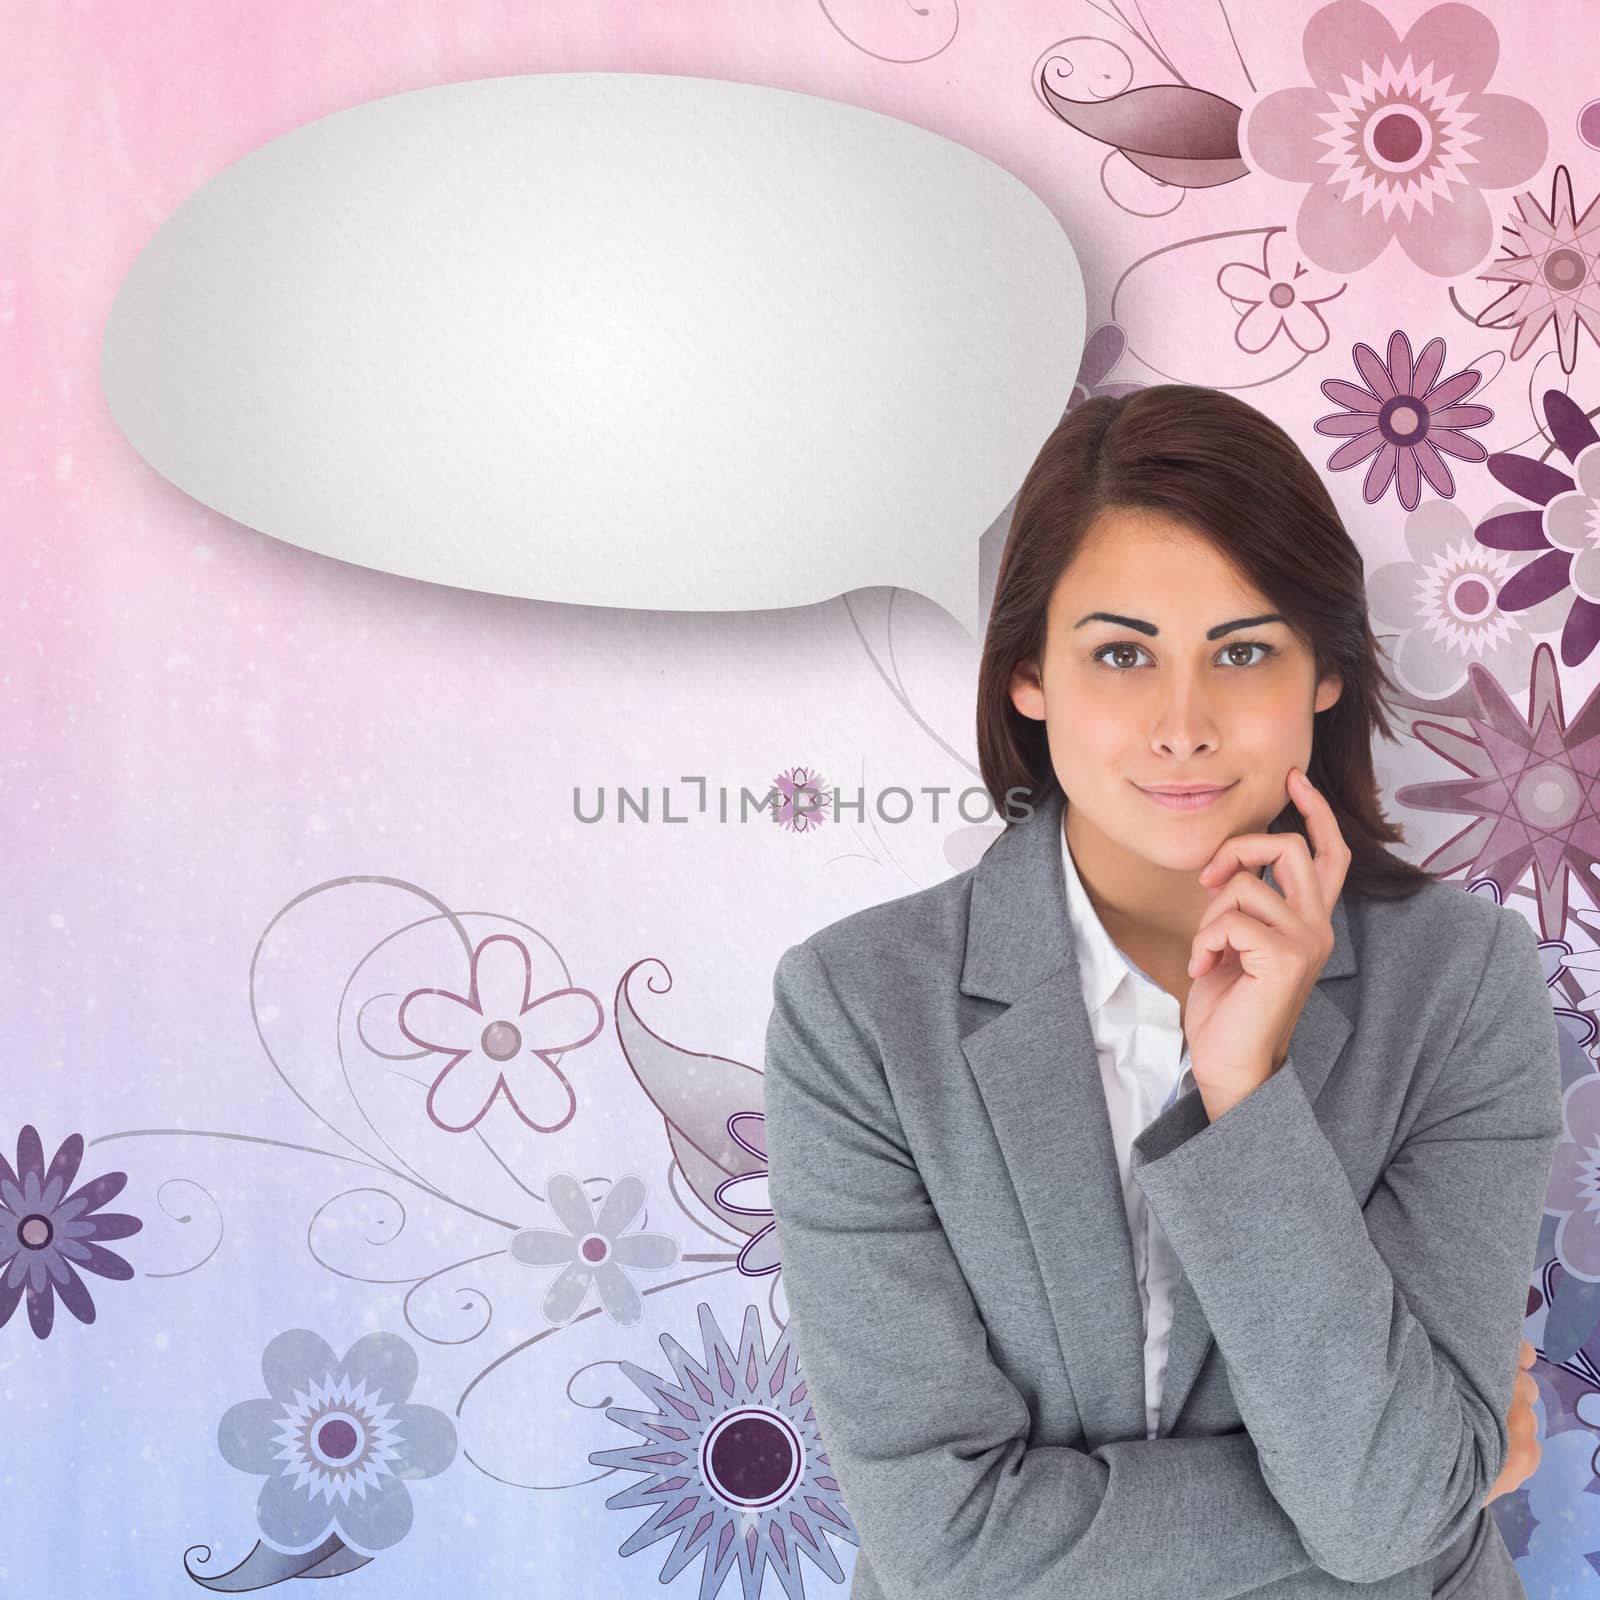 Smiling thoughtful businesswoman with speech bubble against digitally generated girly floral design